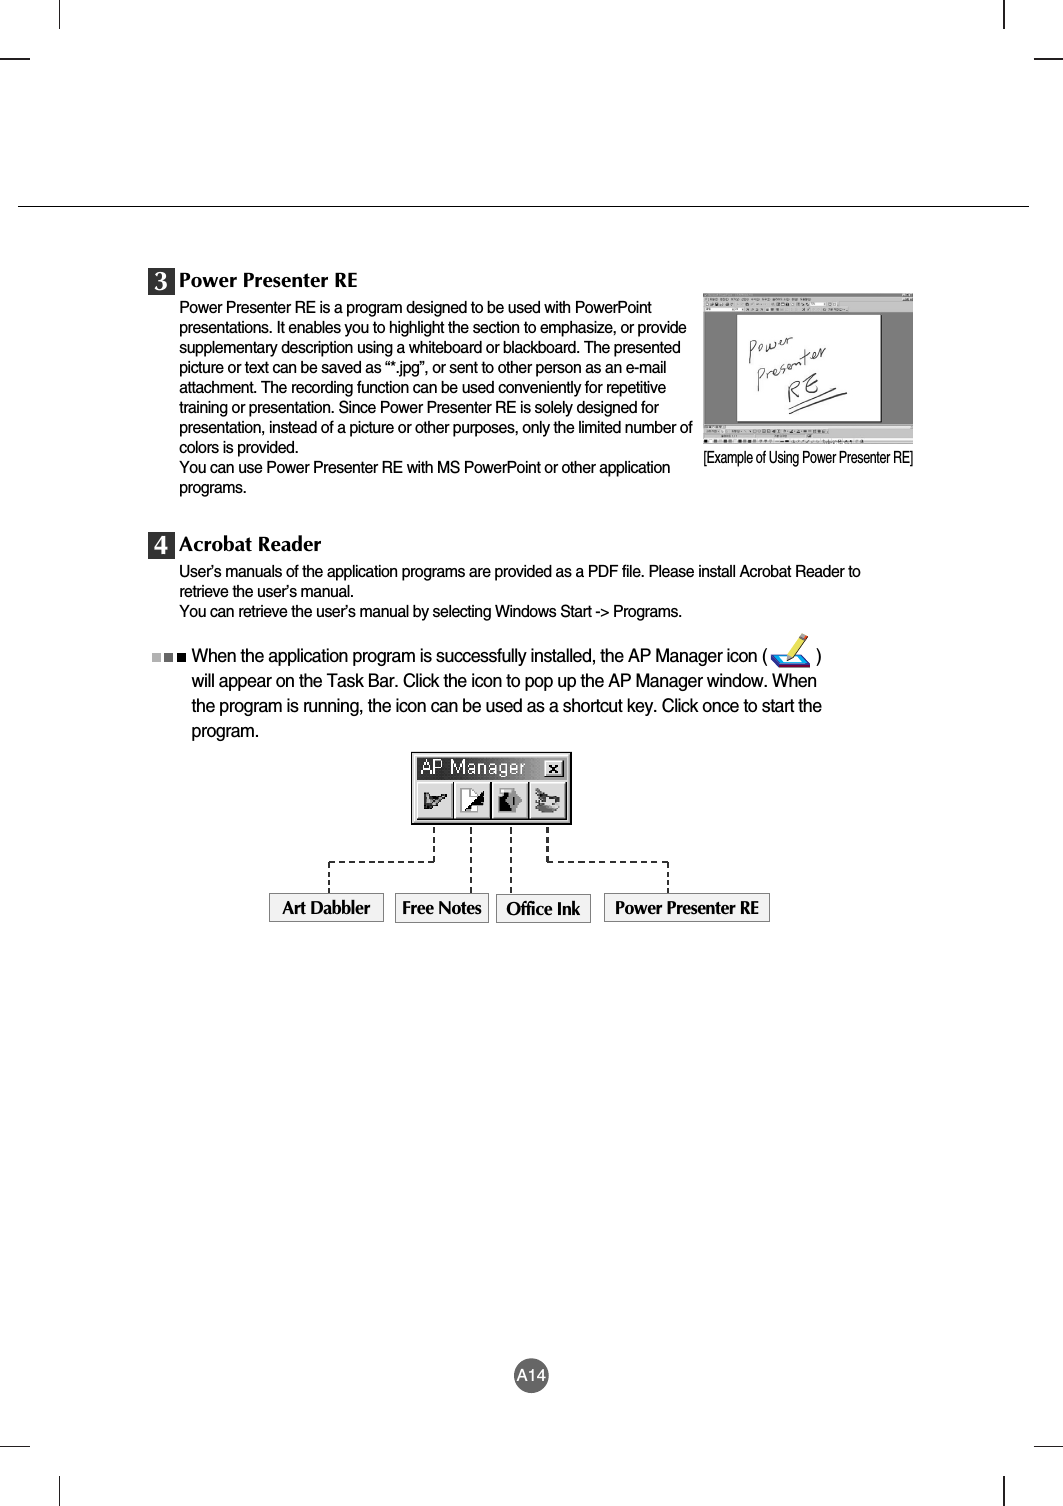 A14[Example of Using Power Presenter RE]Power Presenter REPower Presenter RE is a program designed to be used with PowerPointpresentations. It enables you to highlight the section to emphasize, or providesupplementary description using a whiteboard or blackboard. The presentedpicture or text can be saved as “*.jpg”, or sent to other person as an e-mailattachment. The recording function can be used conveniently for repetitivetraining or presentation. Since Power Presenter RE is solely designed forpresentation, instead of a picture or other purposes, only the limited number ofcolors is provided.You can use Power Presenter RE with MS PowerPoint or other applicationprograms.When the application program is successfully installed, the AP Manager icon (           )will appear on the Task Bar. Click the icon to pop up the AP Manager window. Whenthe program is running, the icon can be used as a shortcut key. Click once to start theprogram.3Acrobat ReaderUser’s manuals of the application programs are provided as a PDF file. Please install Acrobat Reader toretrieve the user’s manual.You can retrieve the user’s manual by selecting Windows Start -&gt; Programs.4Art Dabbler Free Notes Office Ink Power Presenter RE